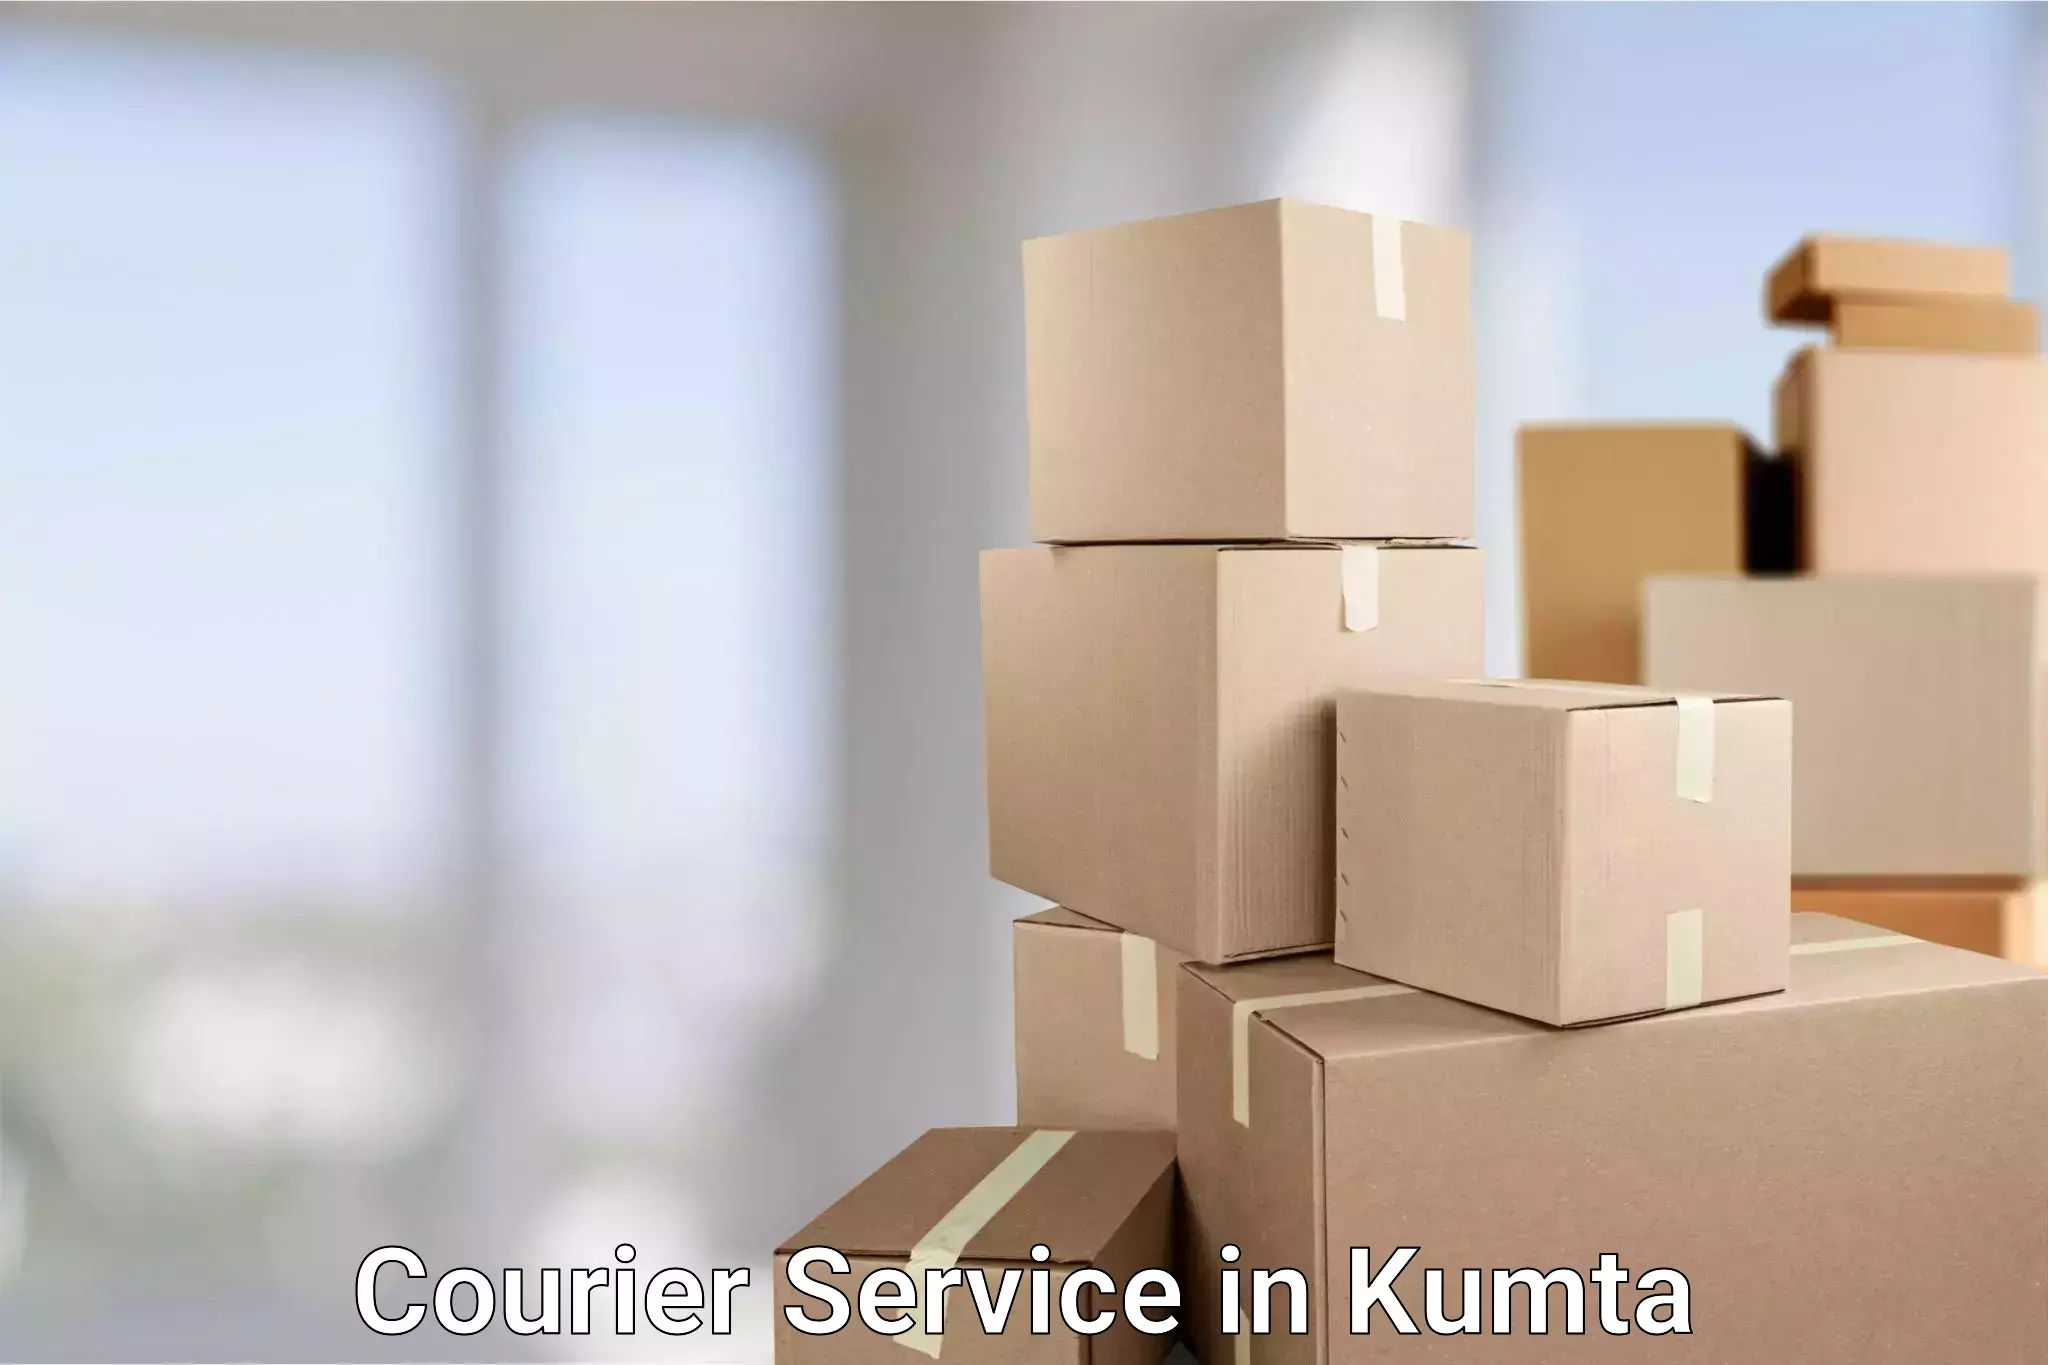 Personalized courier experiences in Kumta